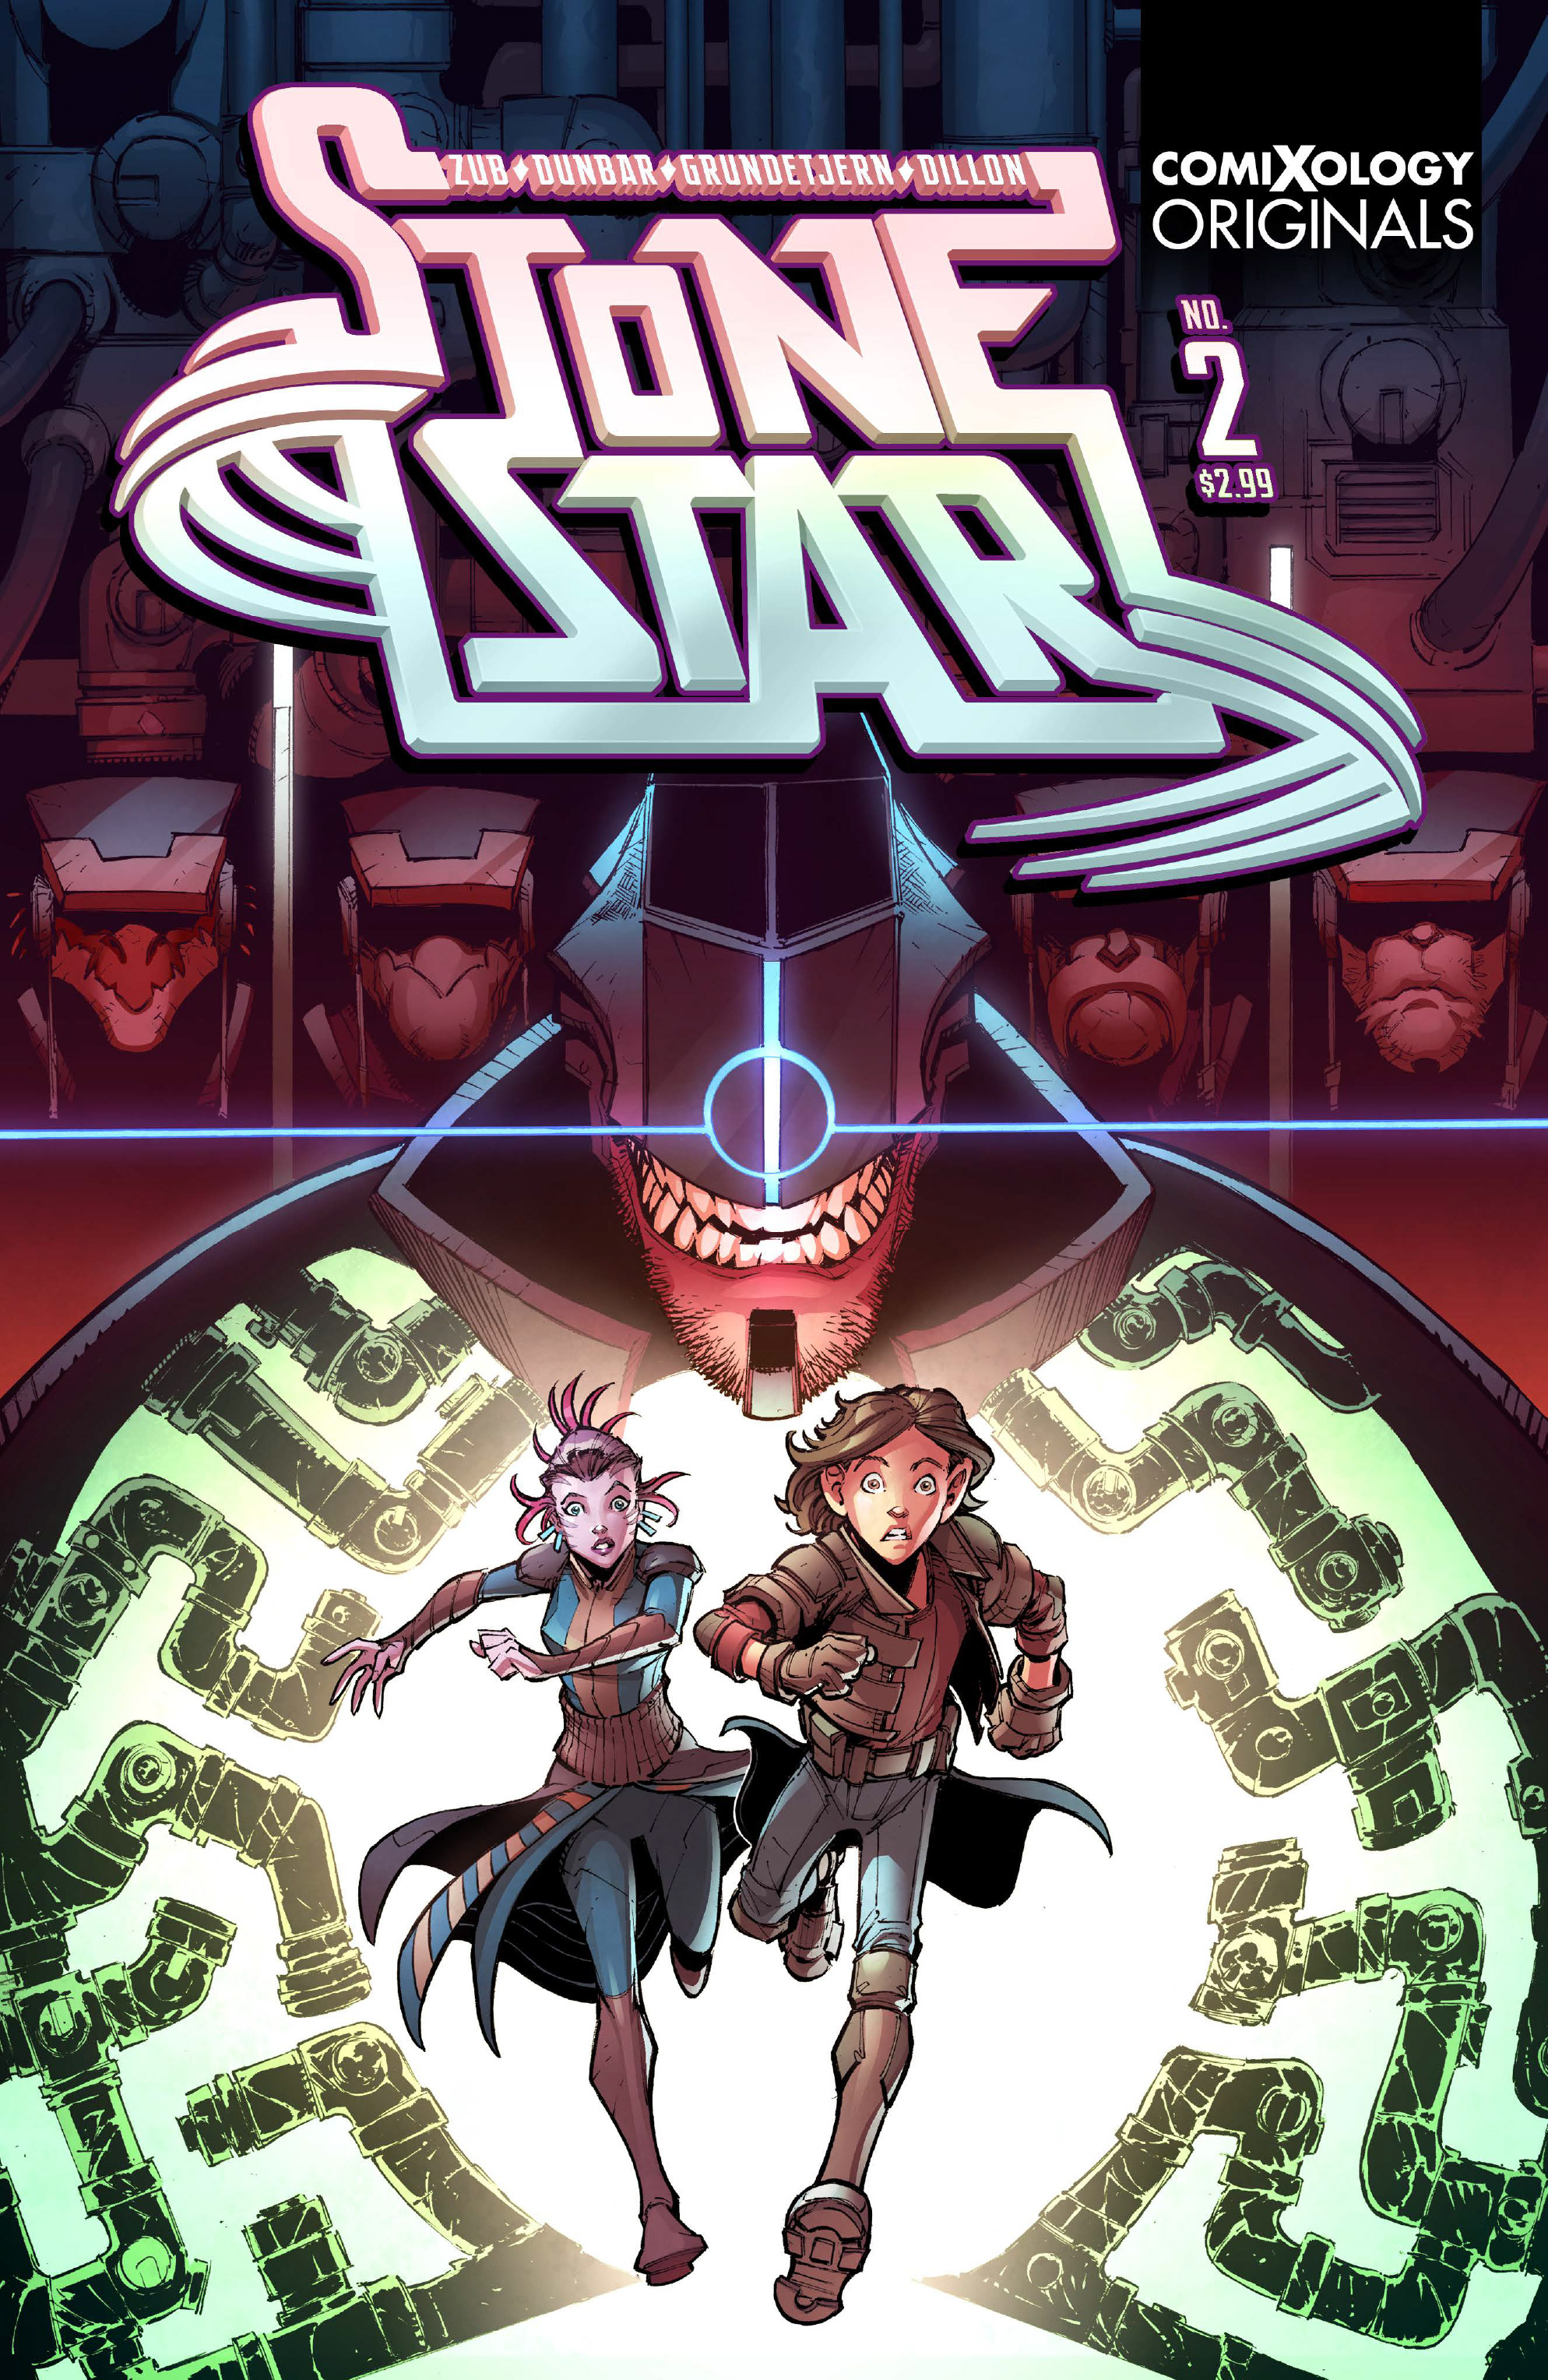 Read online Stone Star comic -  Issue #2 - 1